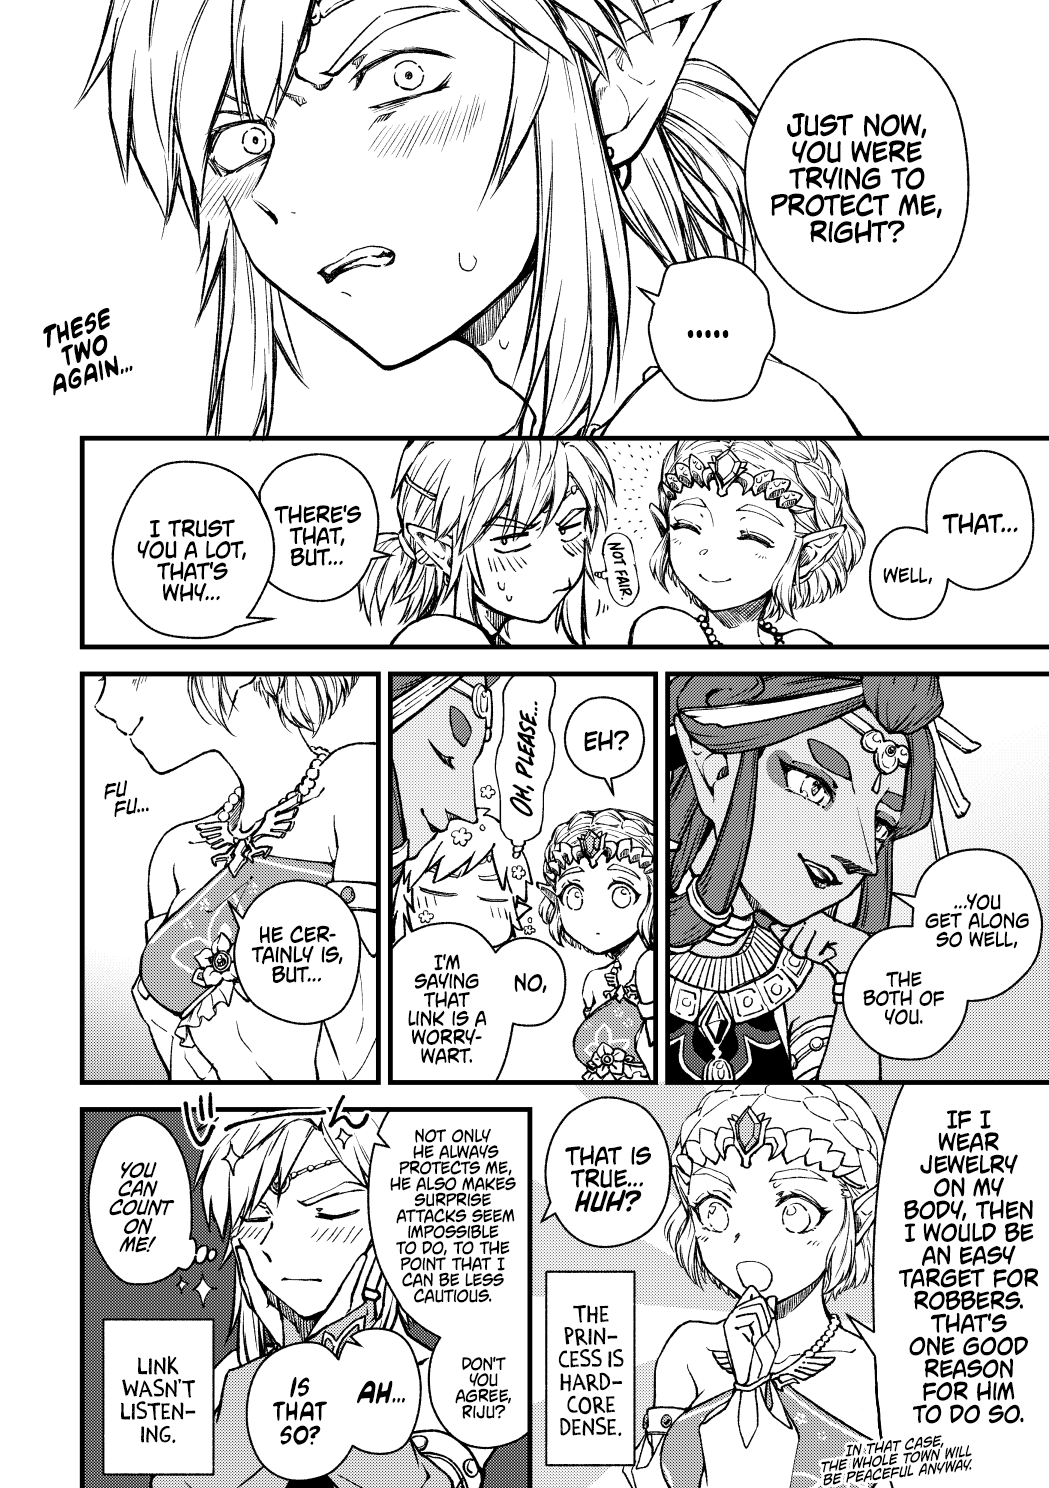 Breath Of The Wild Manga The Legend of Zelda Breath of the Wild - A Watchdog's Instincts - 2 - End.  - Page 1 | Danke.moe